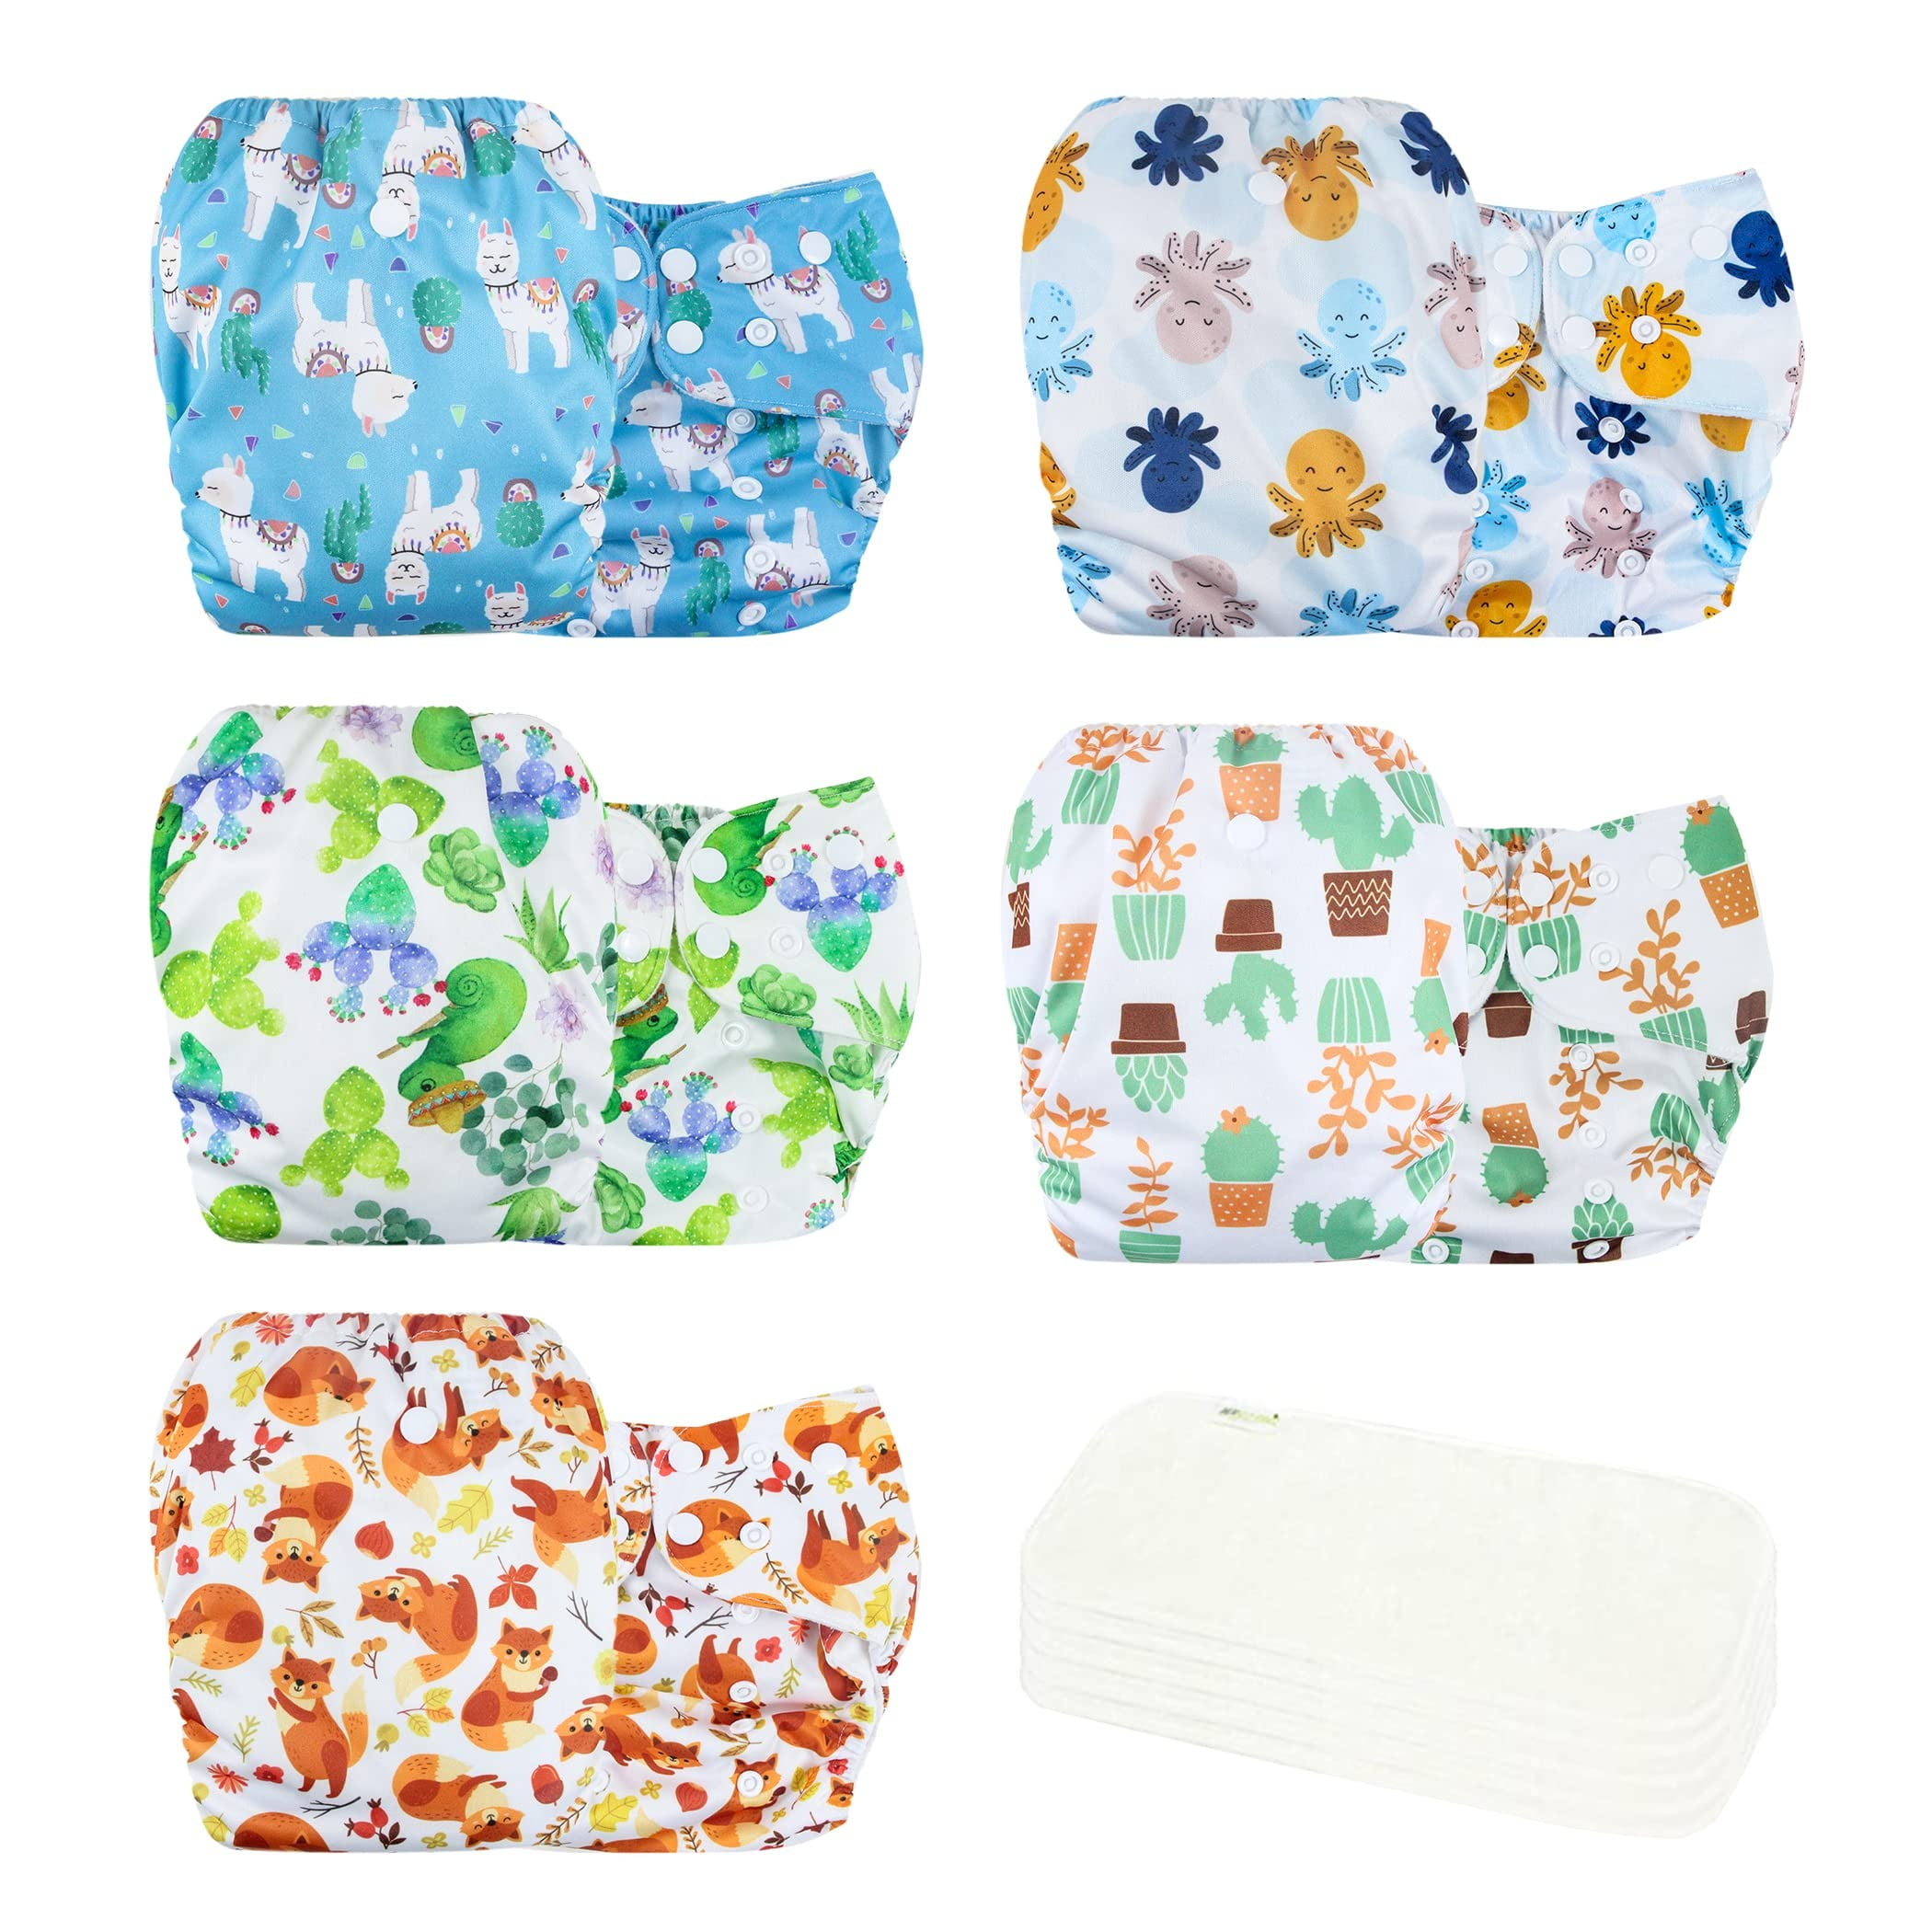 2 to 7 years old BIG Cloth Diaper Nappy Pocket Reusable Toddler Junior Pineapple 